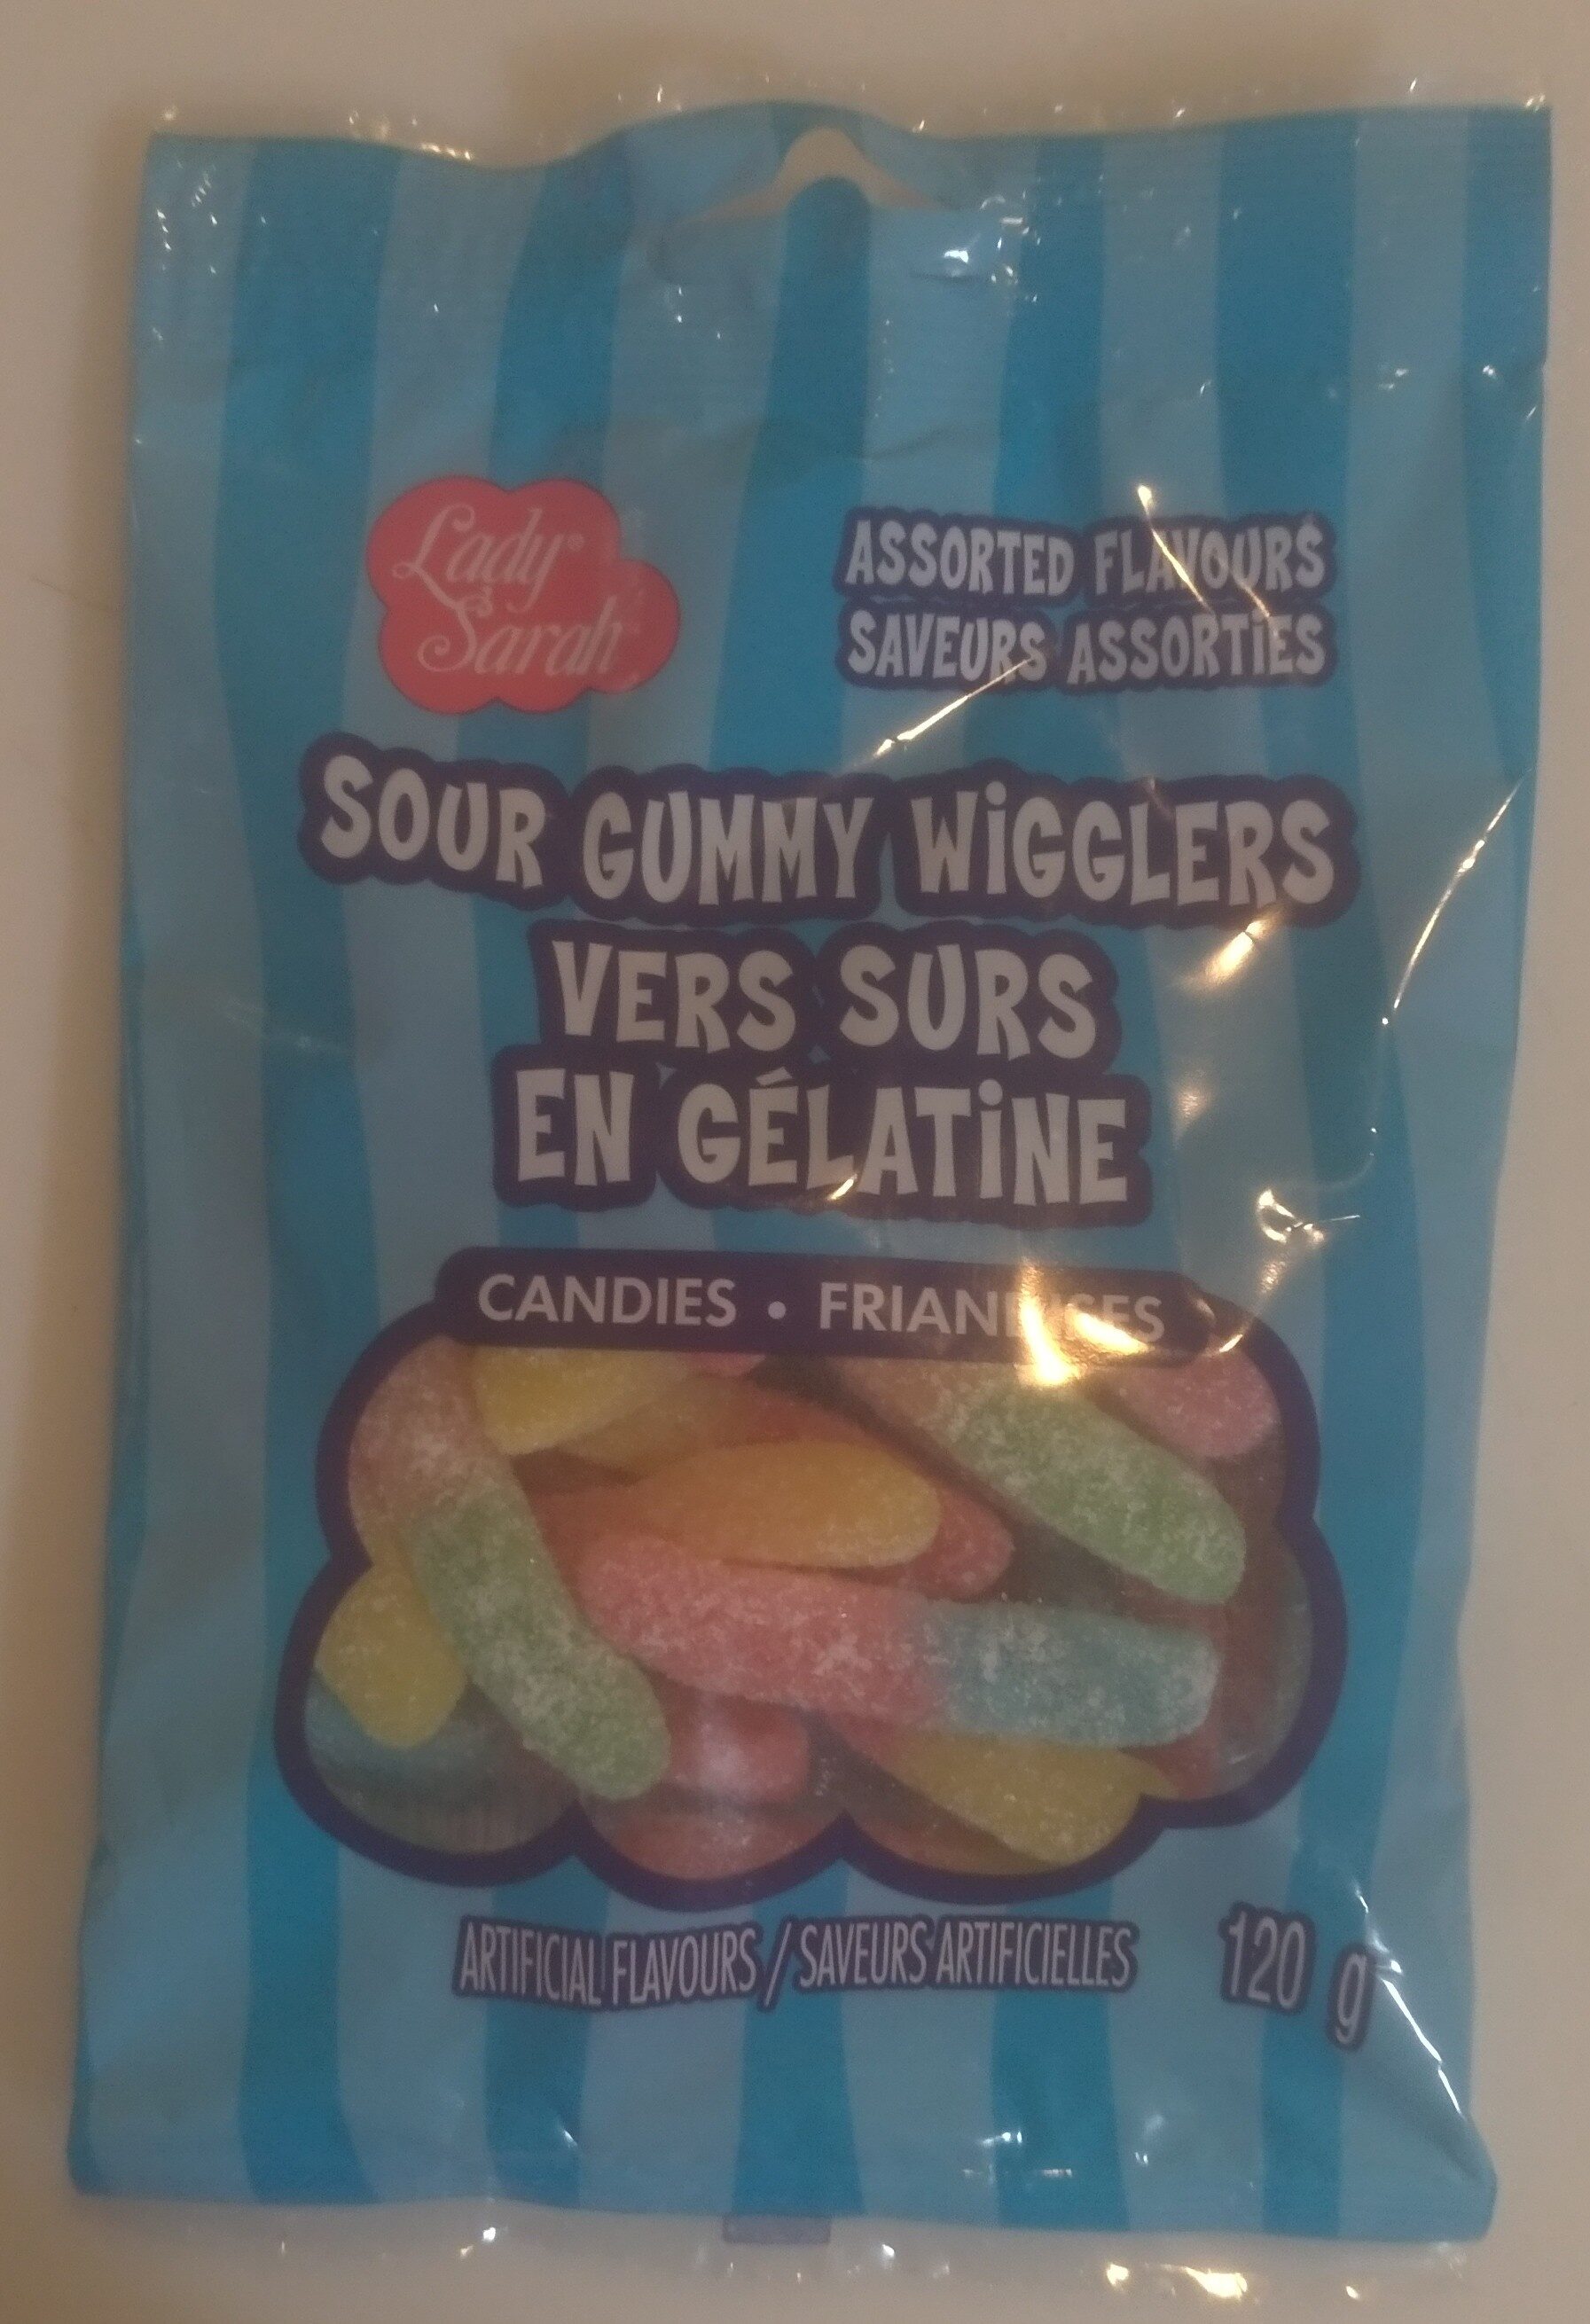 Sour Gummy Wigglers - Product